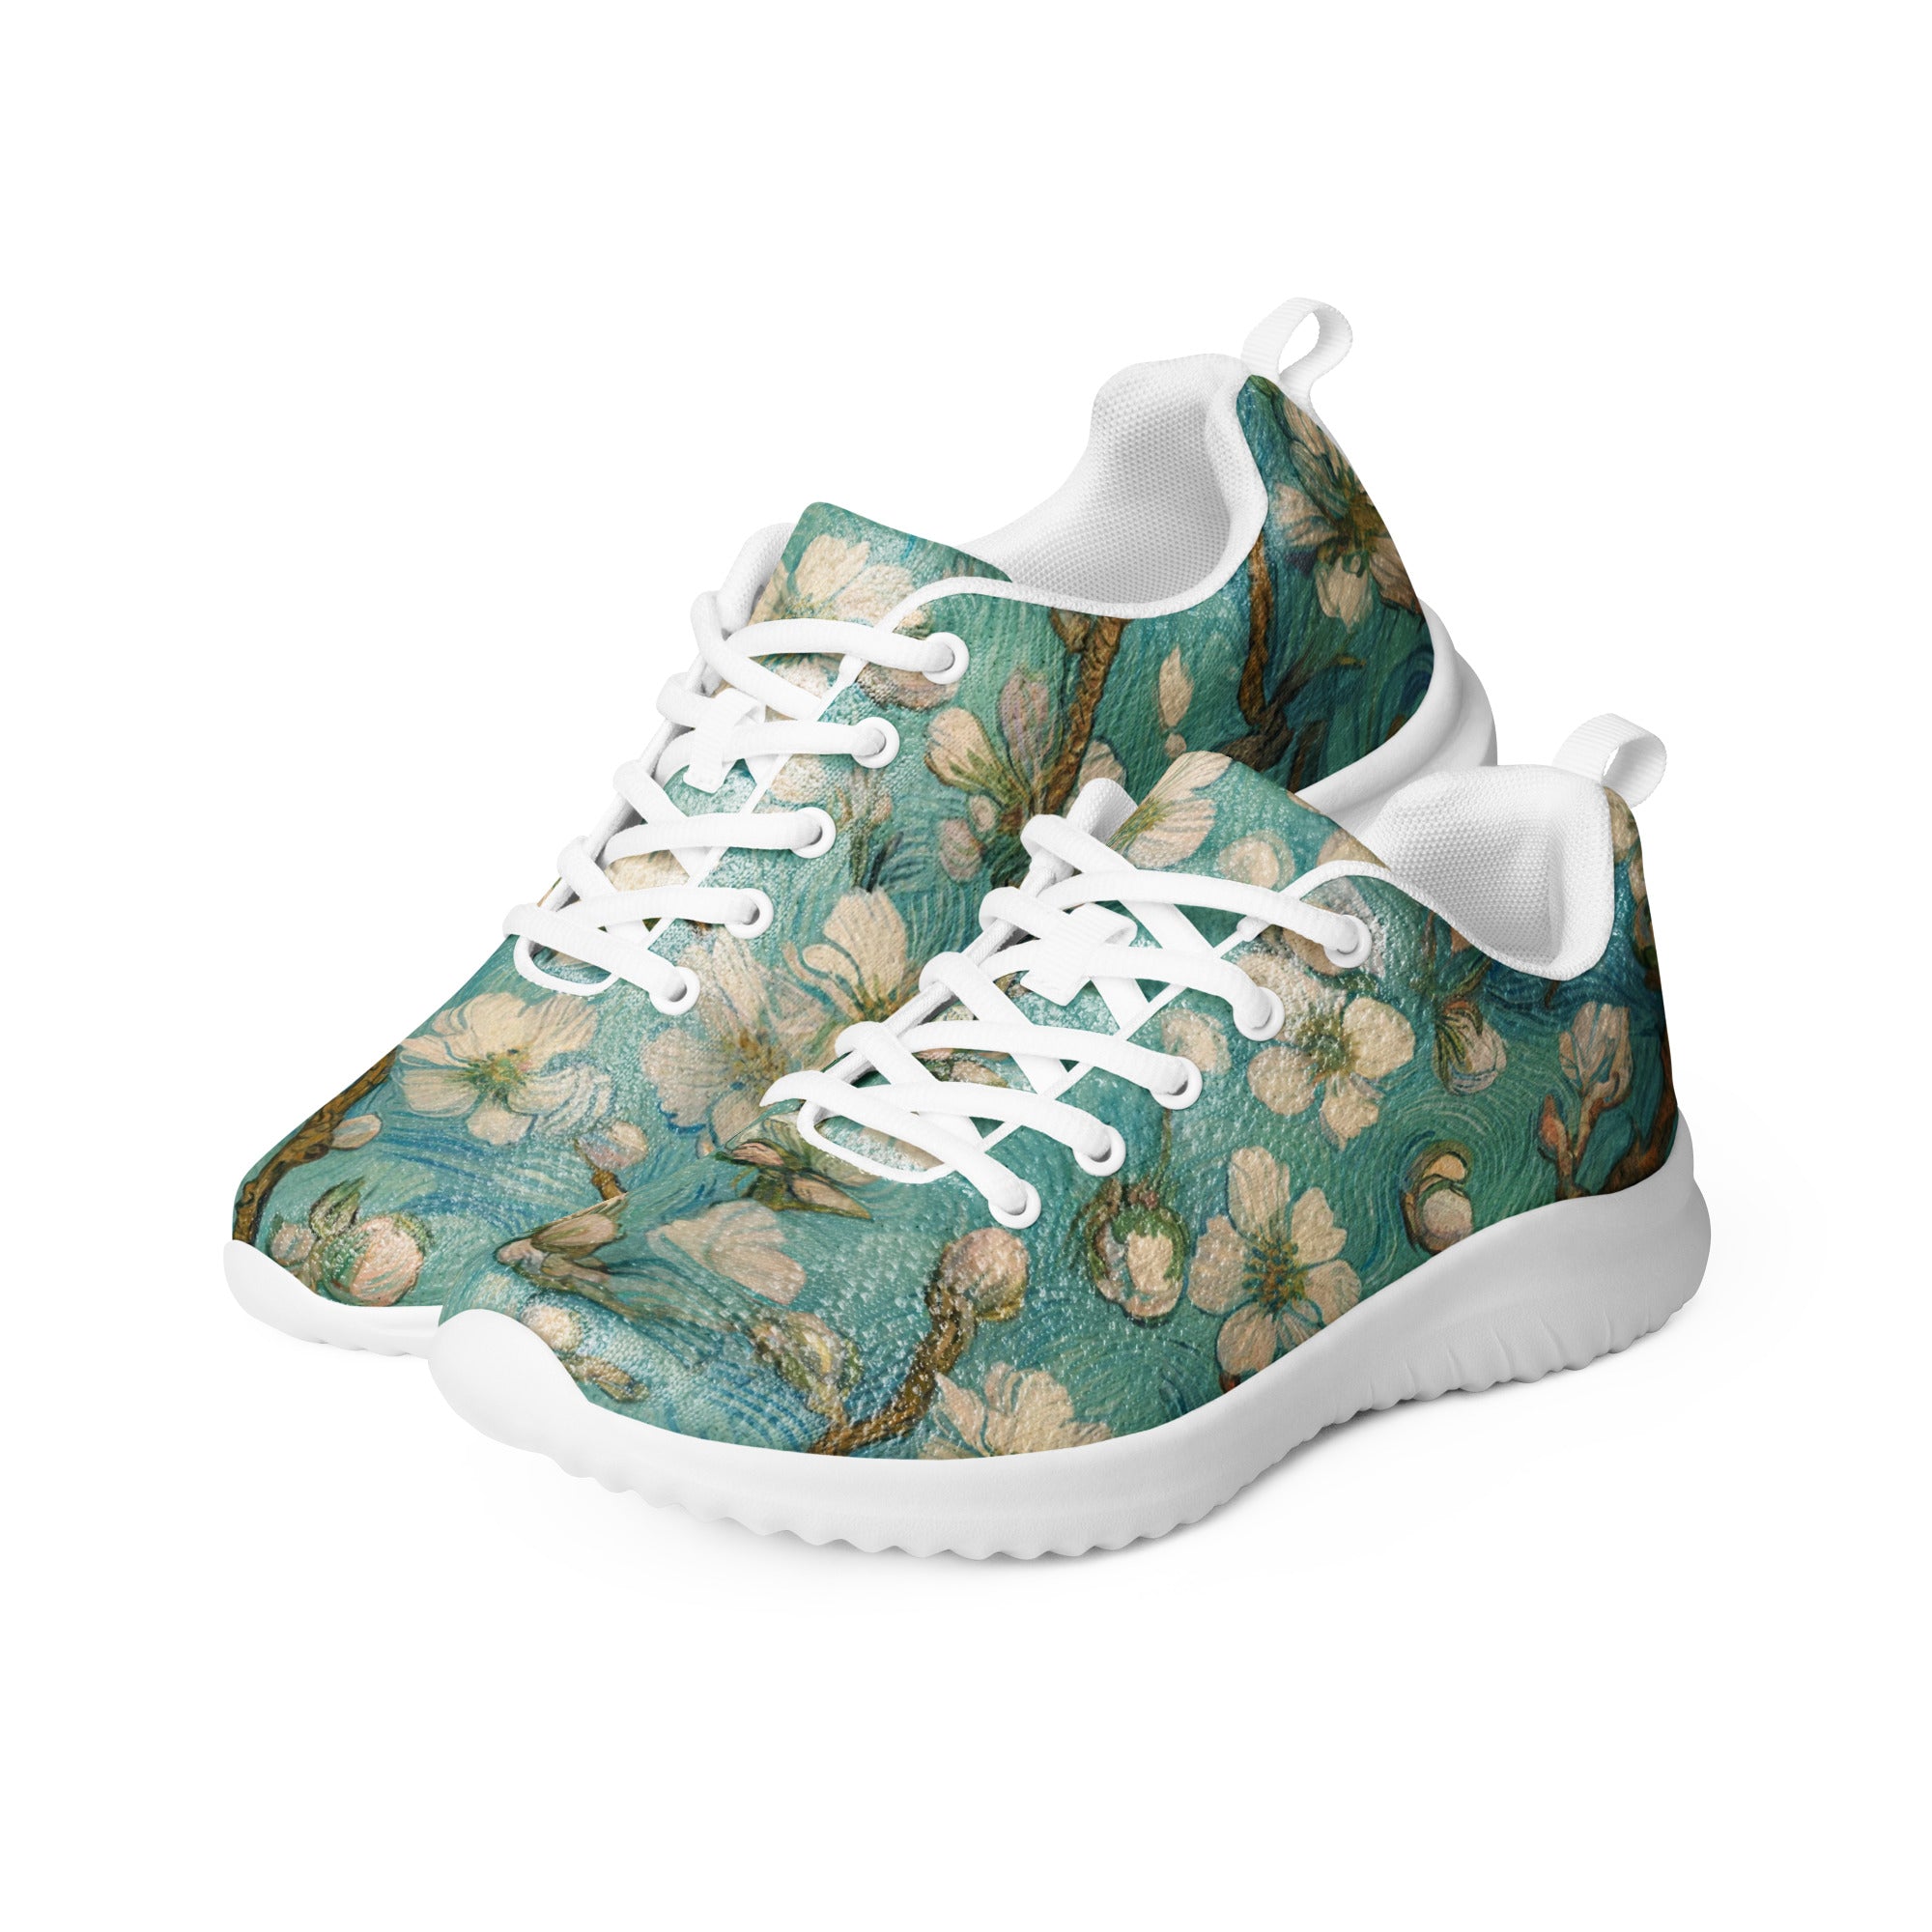 Vincent van Gogh 'Almond Blossom' Lightweight Athletic Running Shoes | Premium Art Sneakers for Men